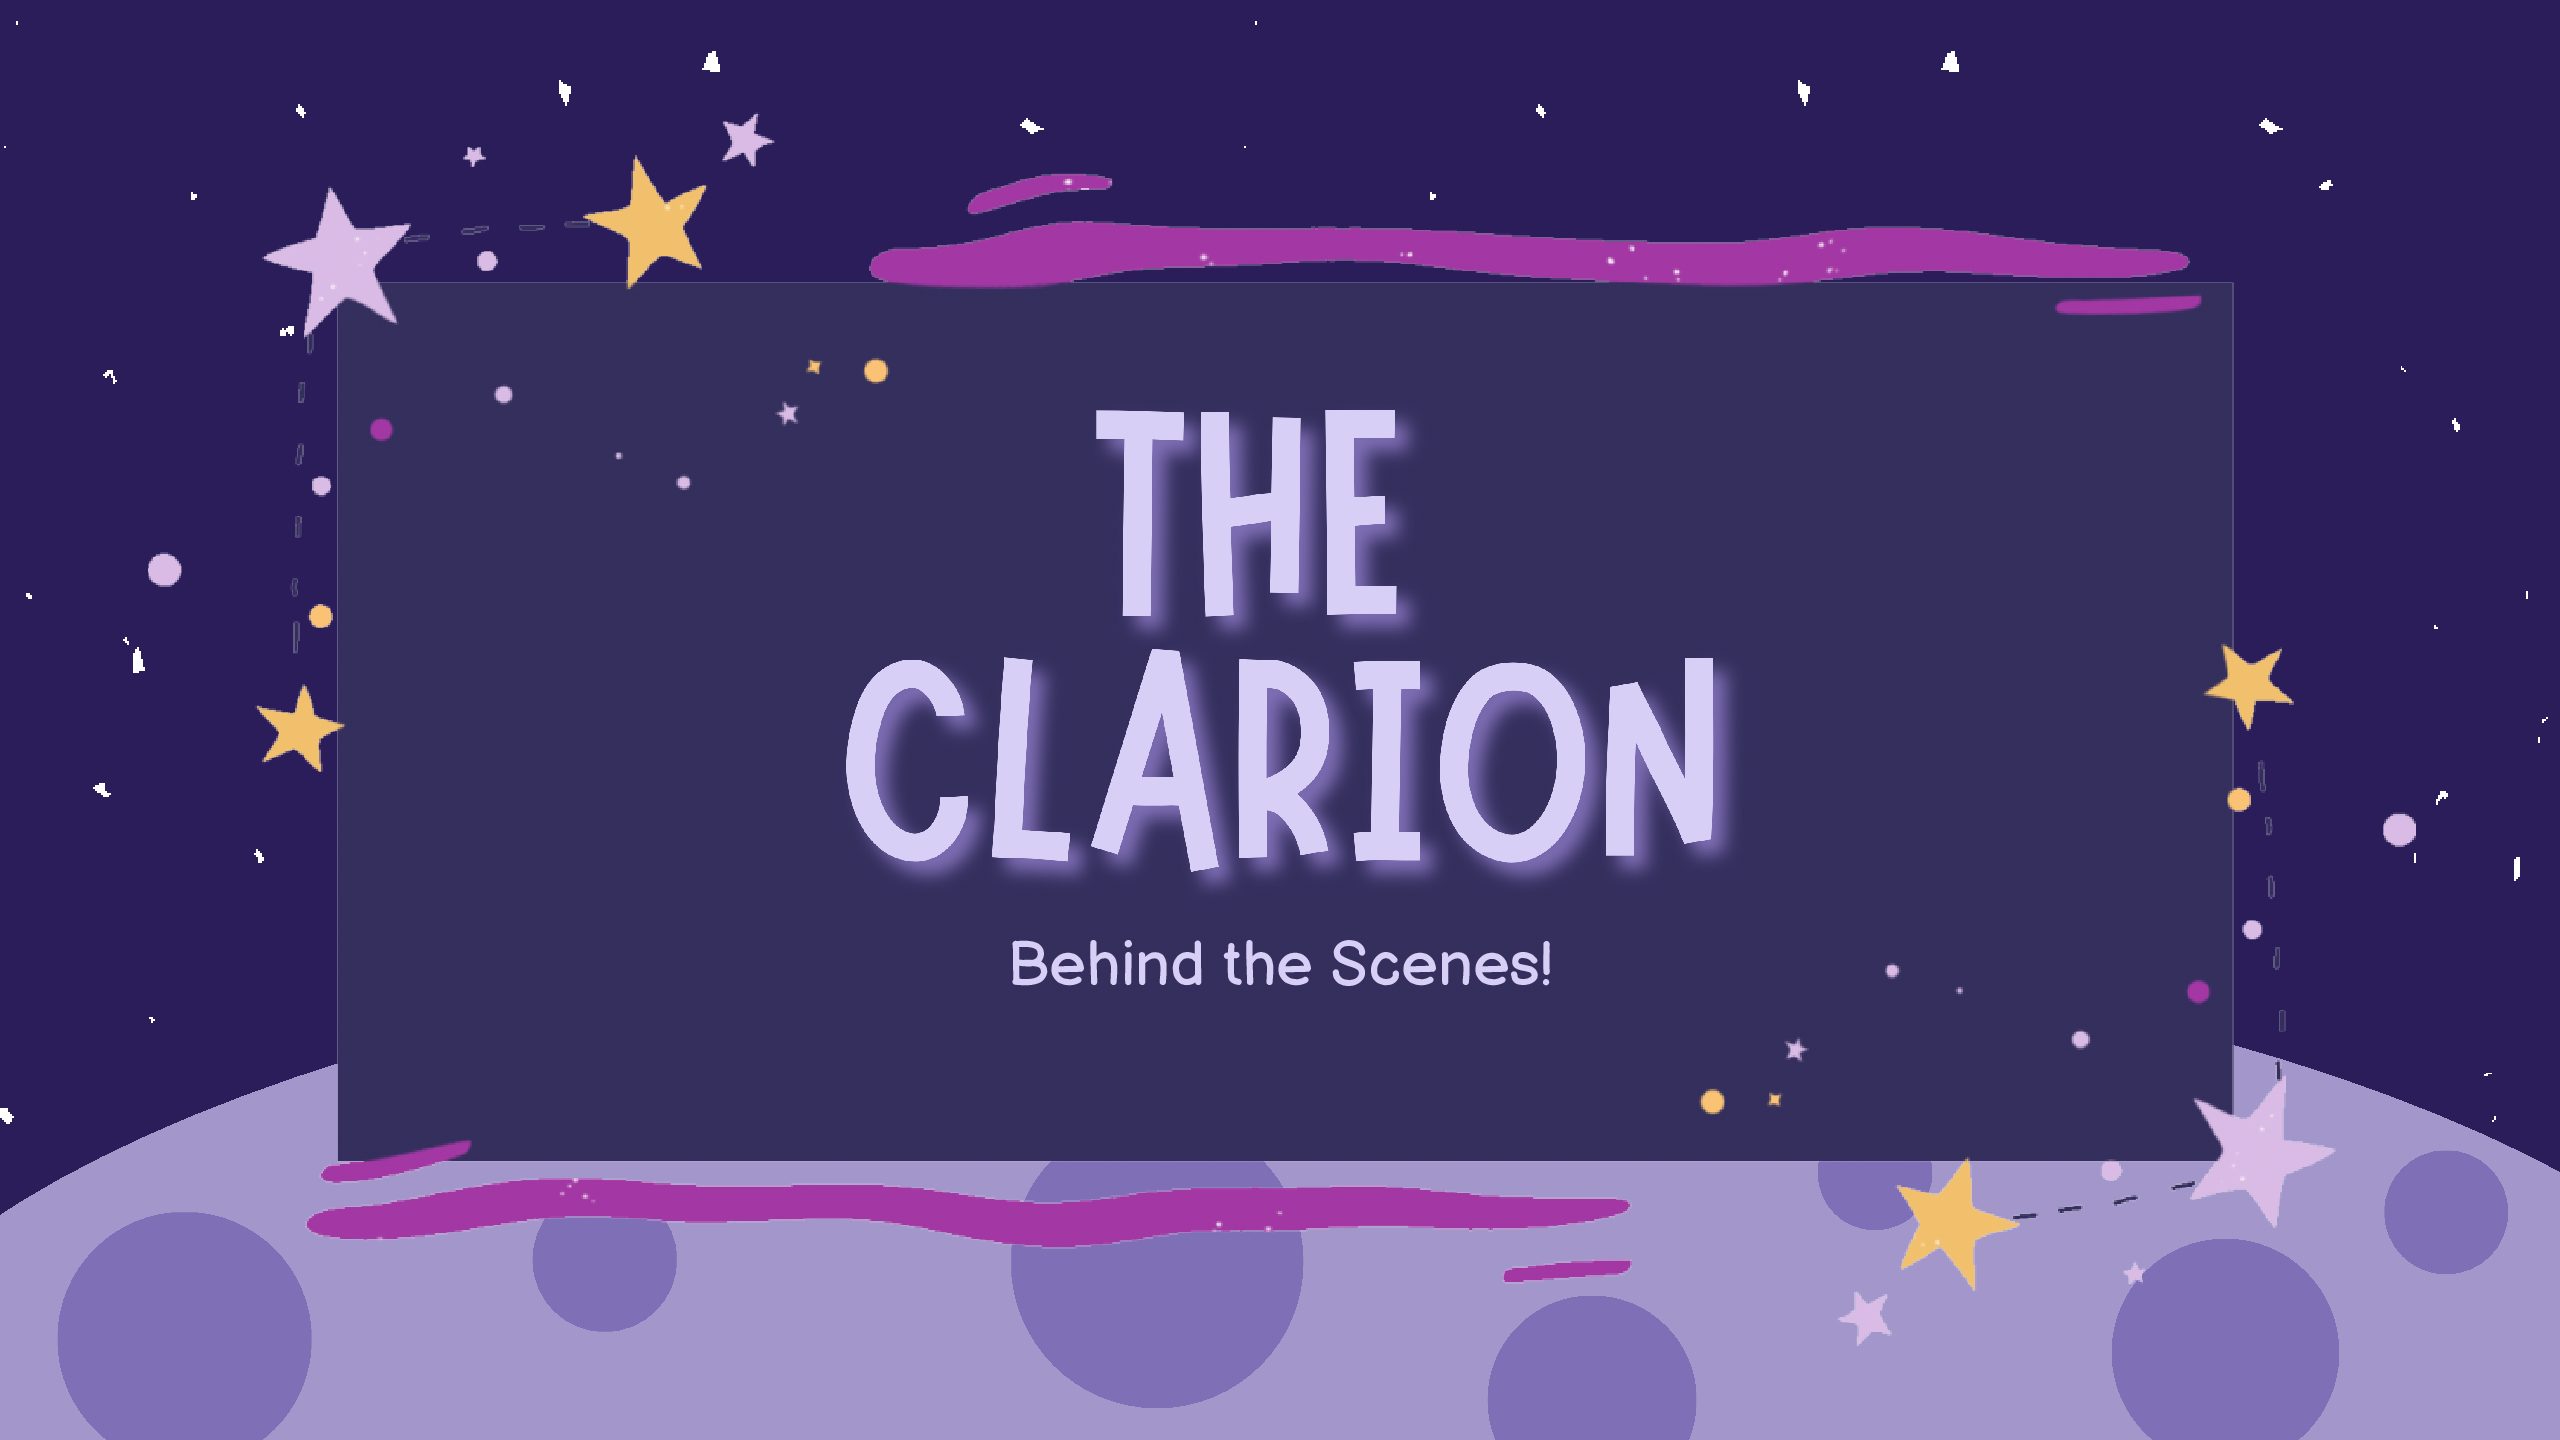 Behind the Scenes: The Clarion